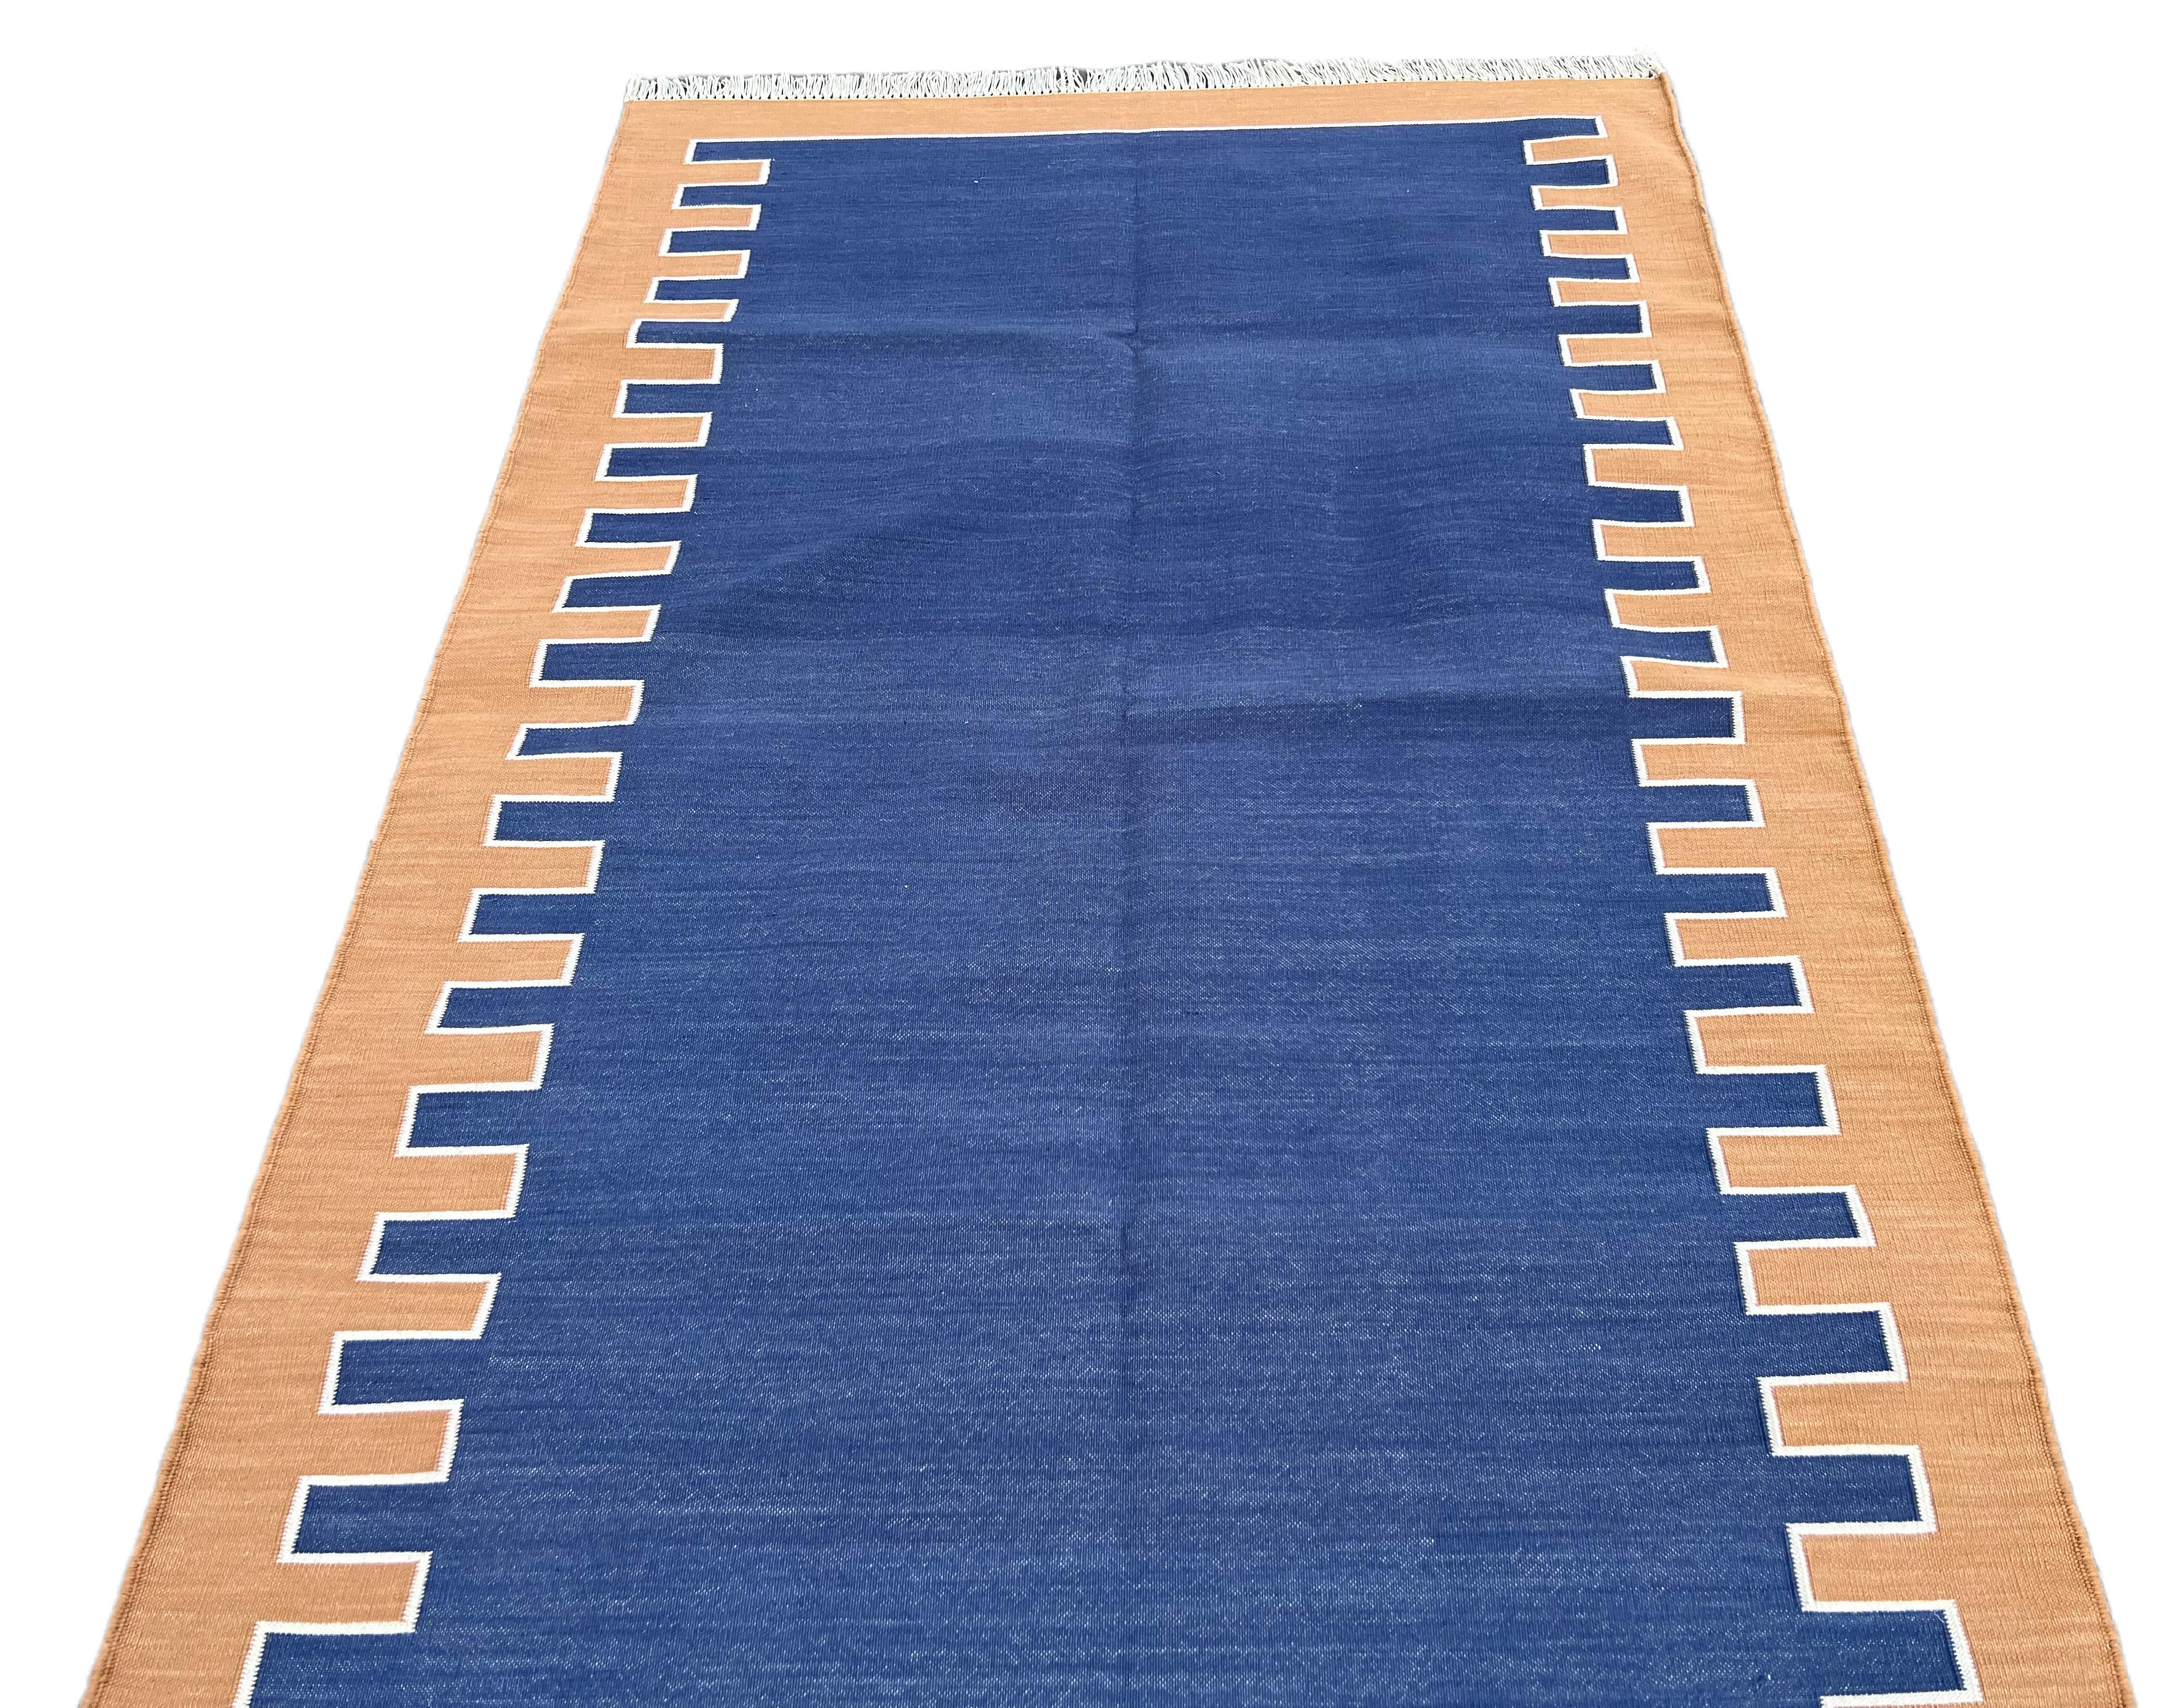 Handmade Cotton Area Flat Weave Rug, 3x5 Blue And Tan Zig Zag Striped Dhurrie For Sale 1